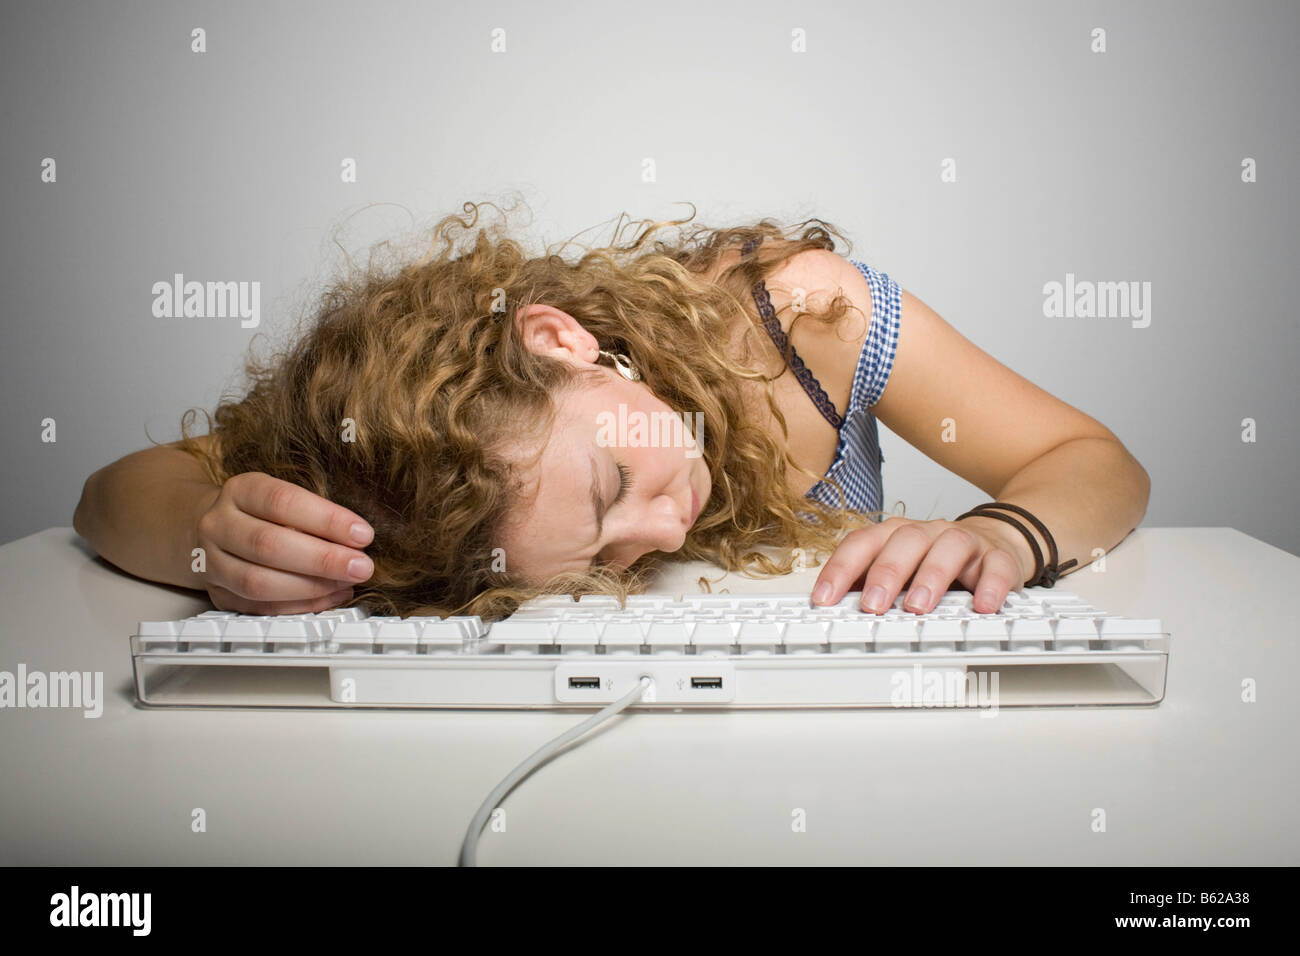 Young woman with long hair resting her head on a computer keyboard on a table Stock Photo